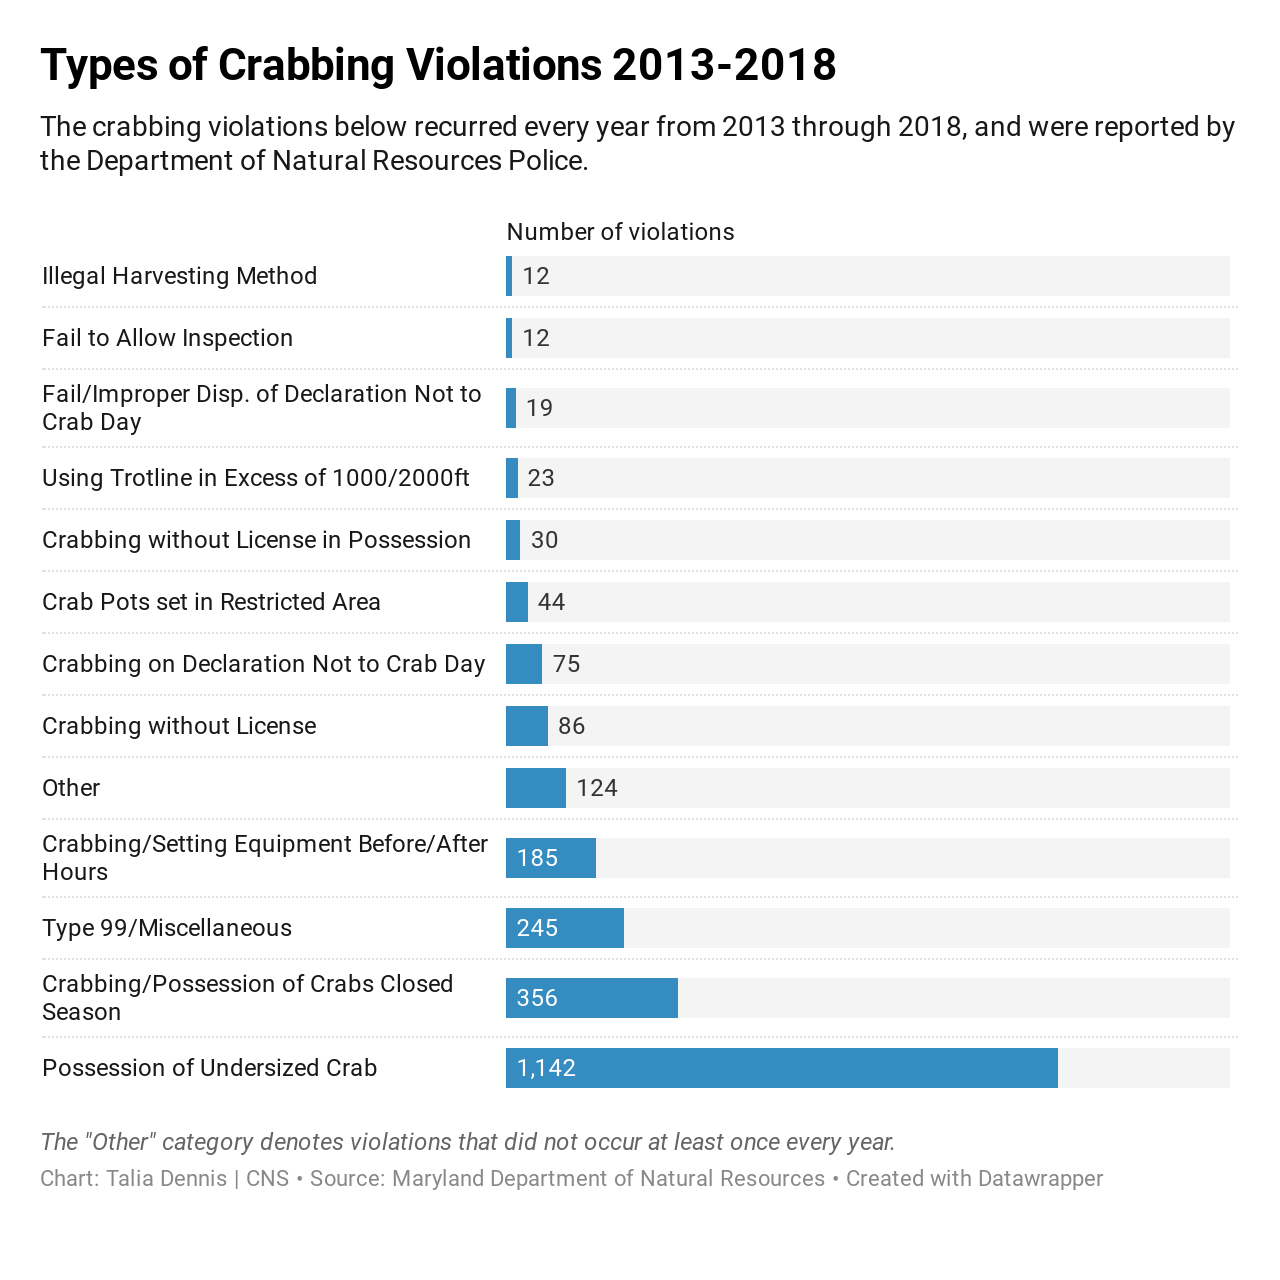 Types of crabbing violations in Maryland.